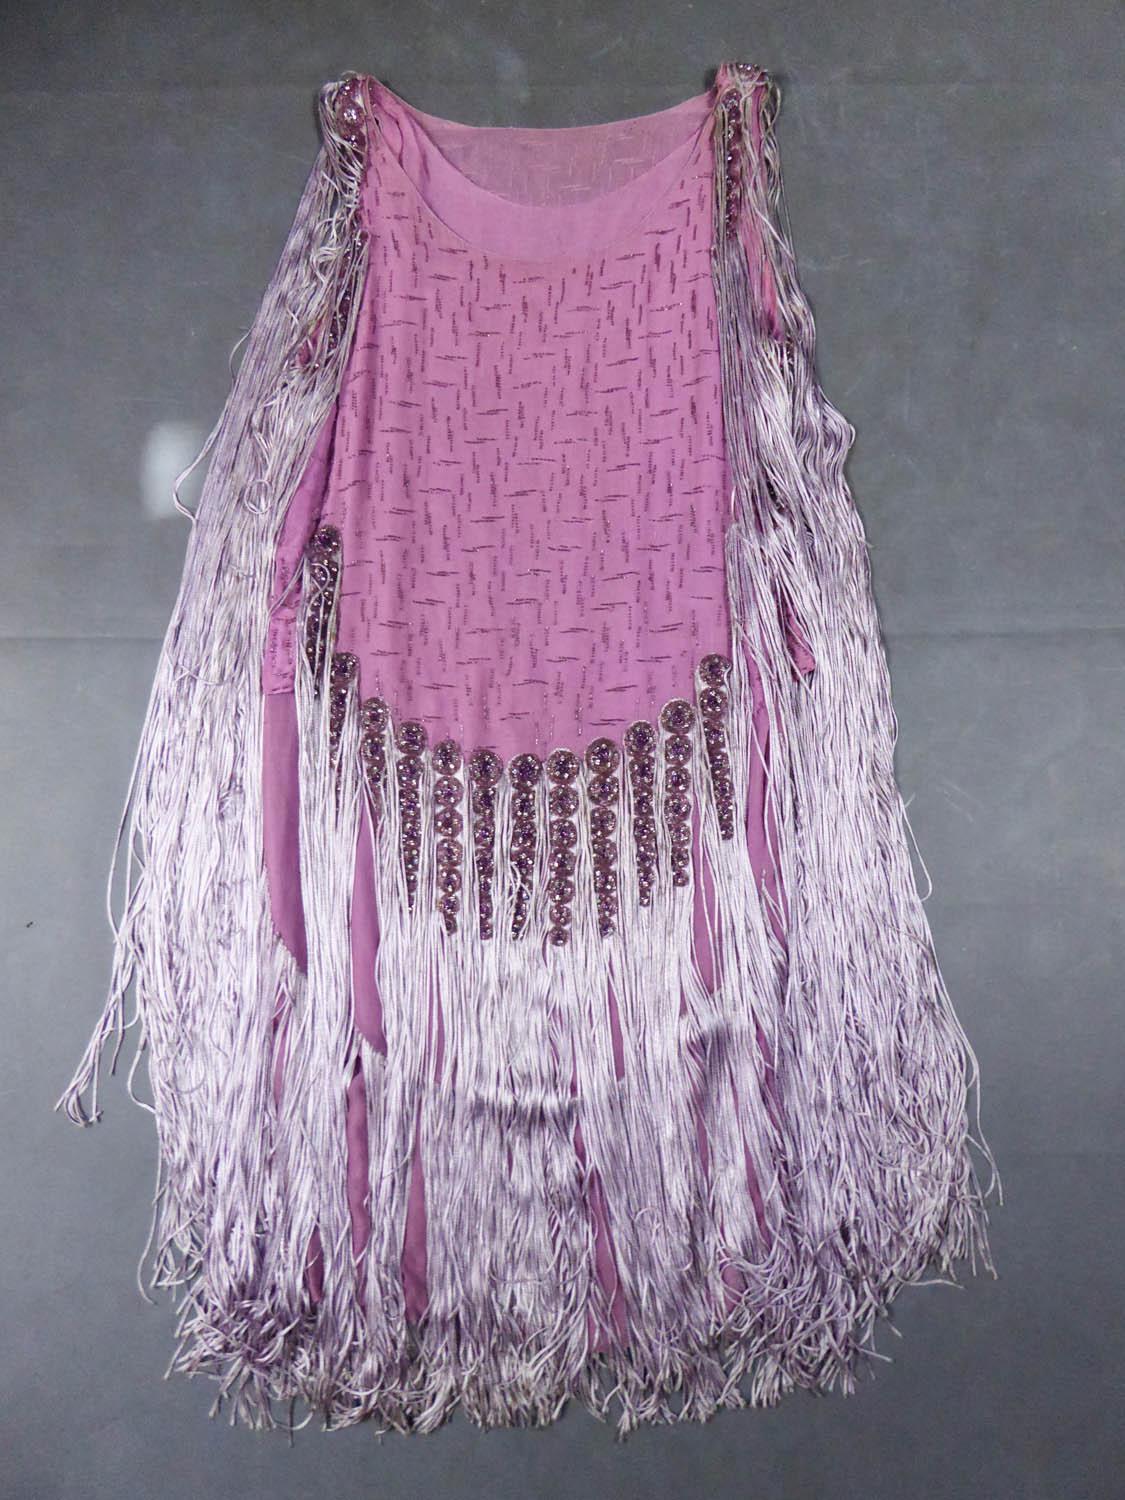 Circa 1928
France

Beautiful Charleston-type ball gown dating from the Twenties . Tubular dress in pink-purple silk crepe embroidered with geometric patterns in glass beads. Long skittles in silver cream silk laces starting from the shoulders and